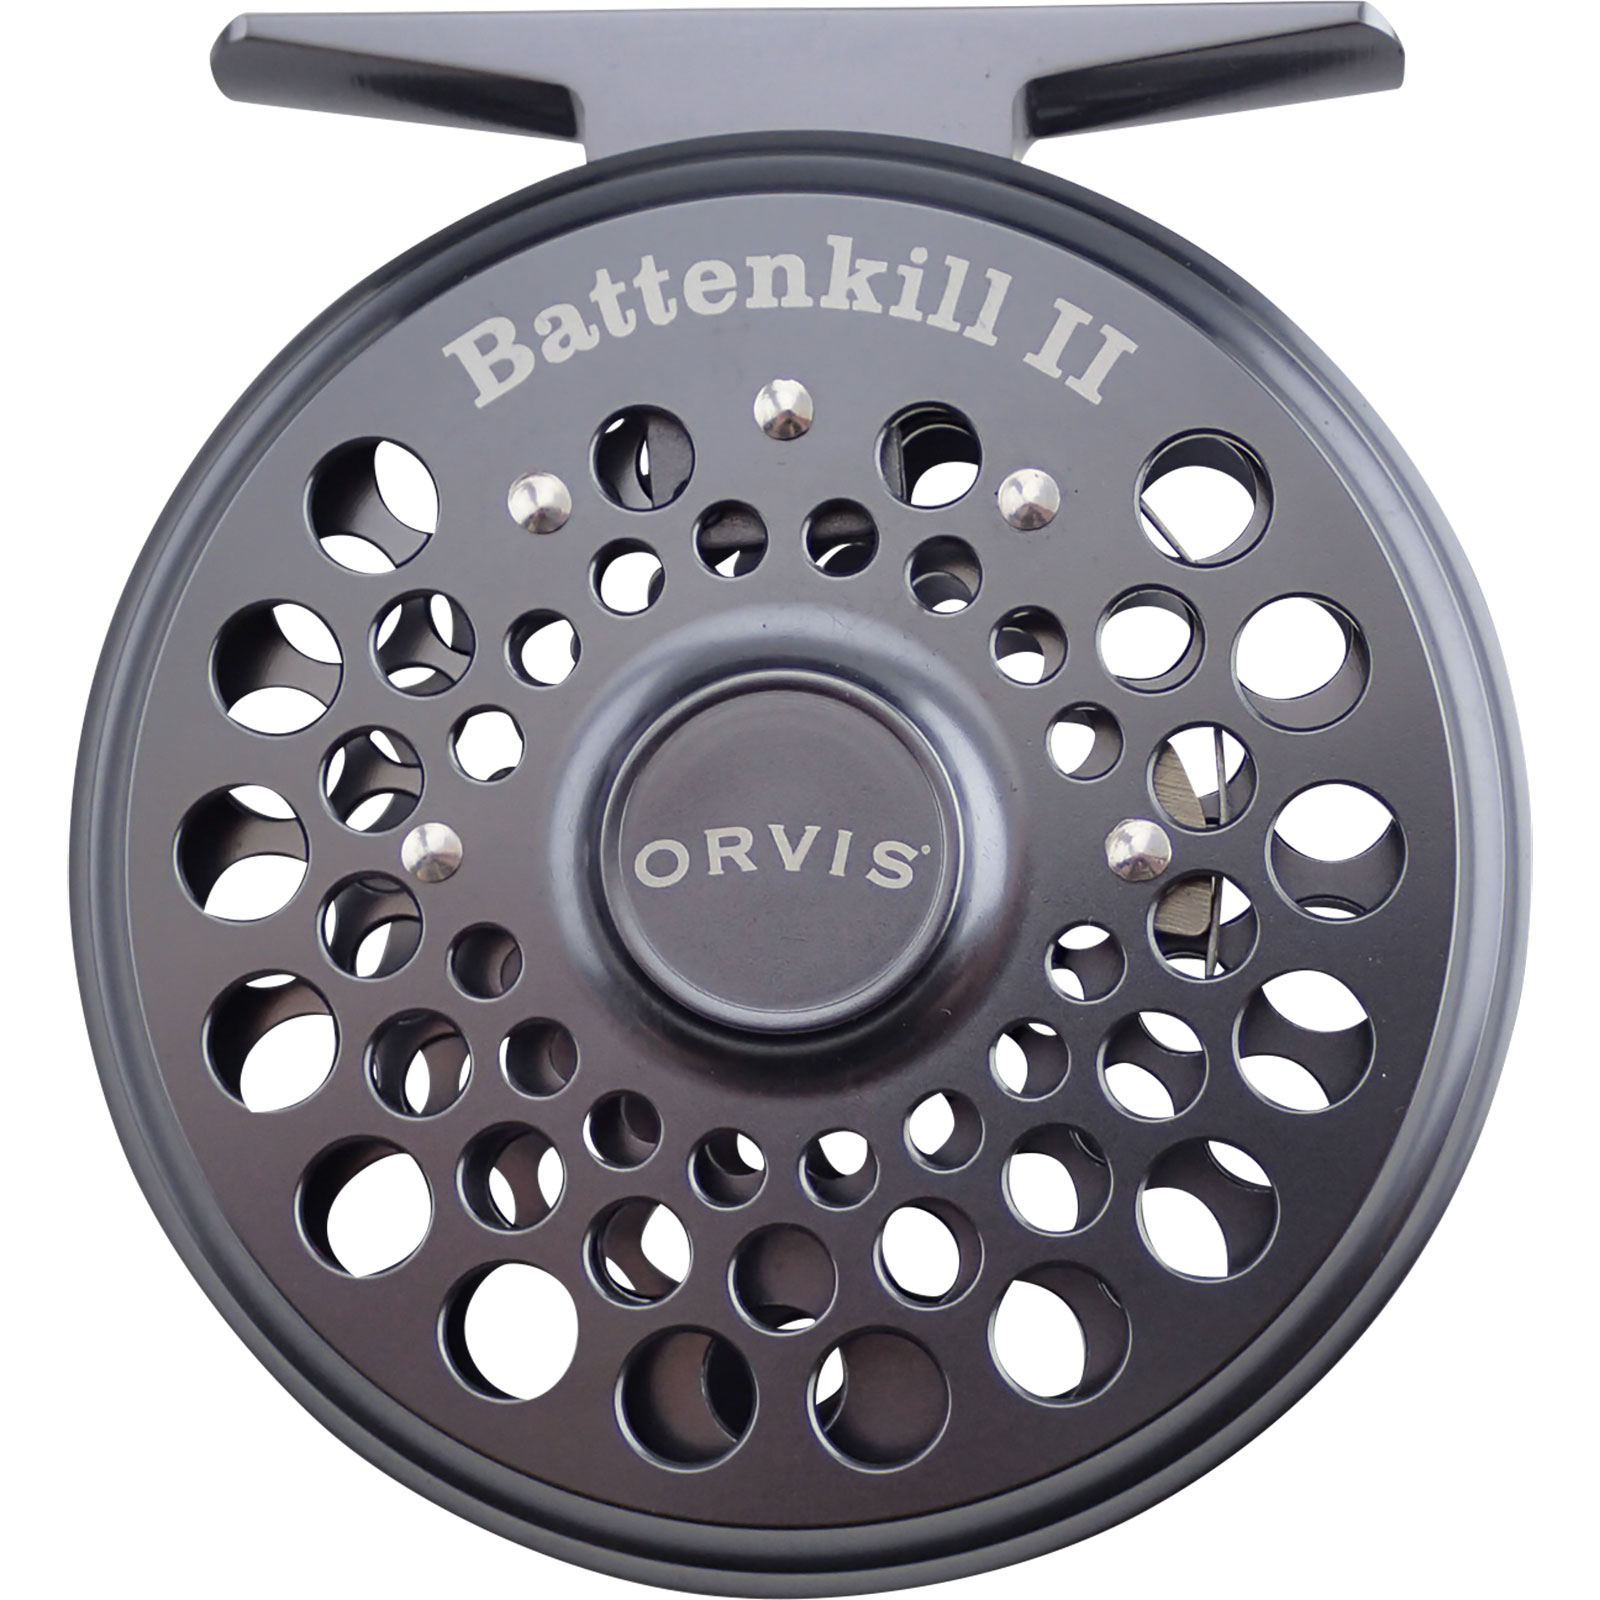 An Orvis Battenkill 5/6, 3 trout fly reel in Orvis pouch; and a